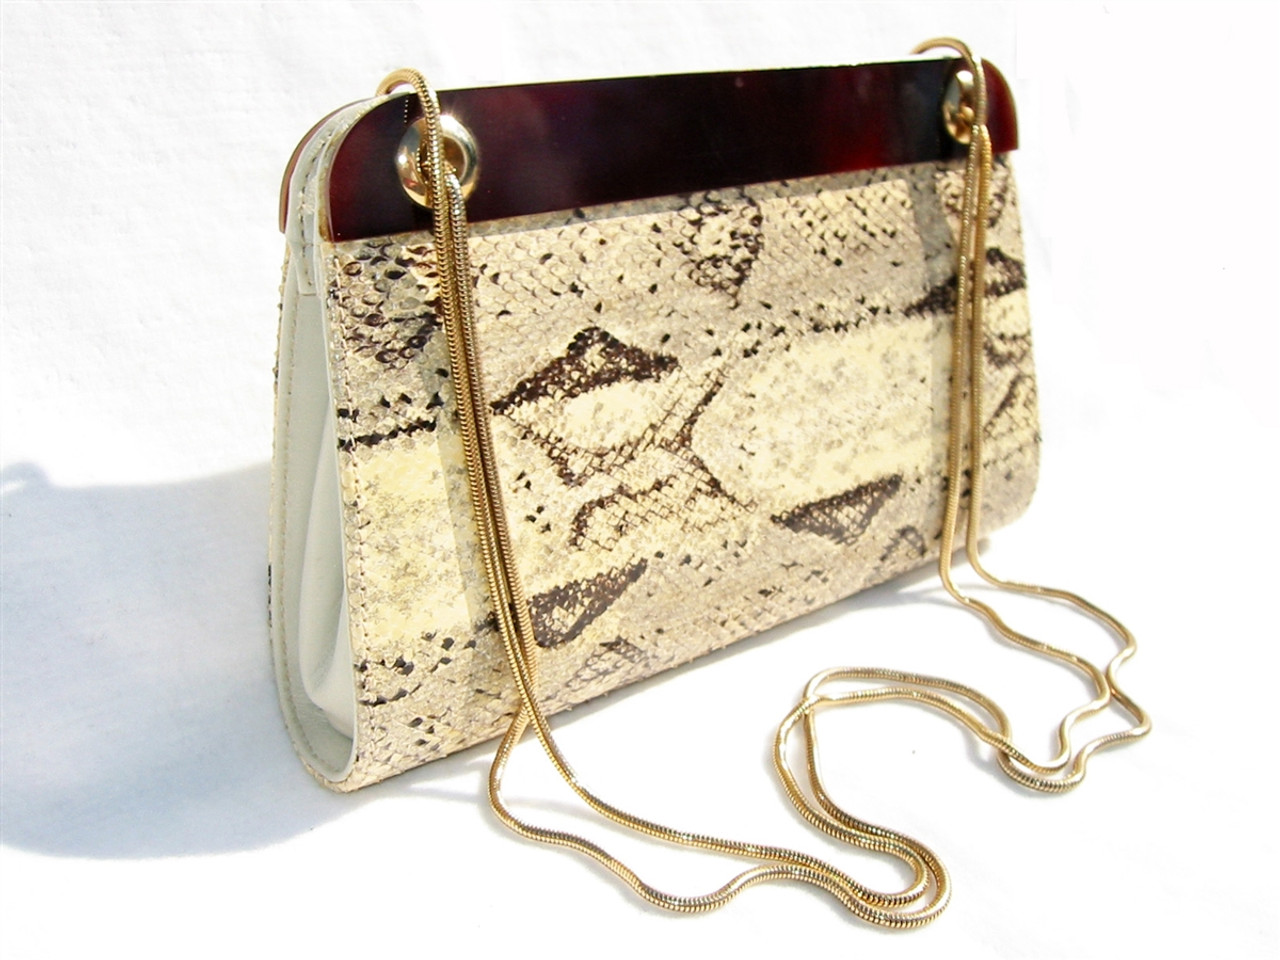 Vintage 1950s Lucite Handbag - Where On Earth Antiques and Vintage